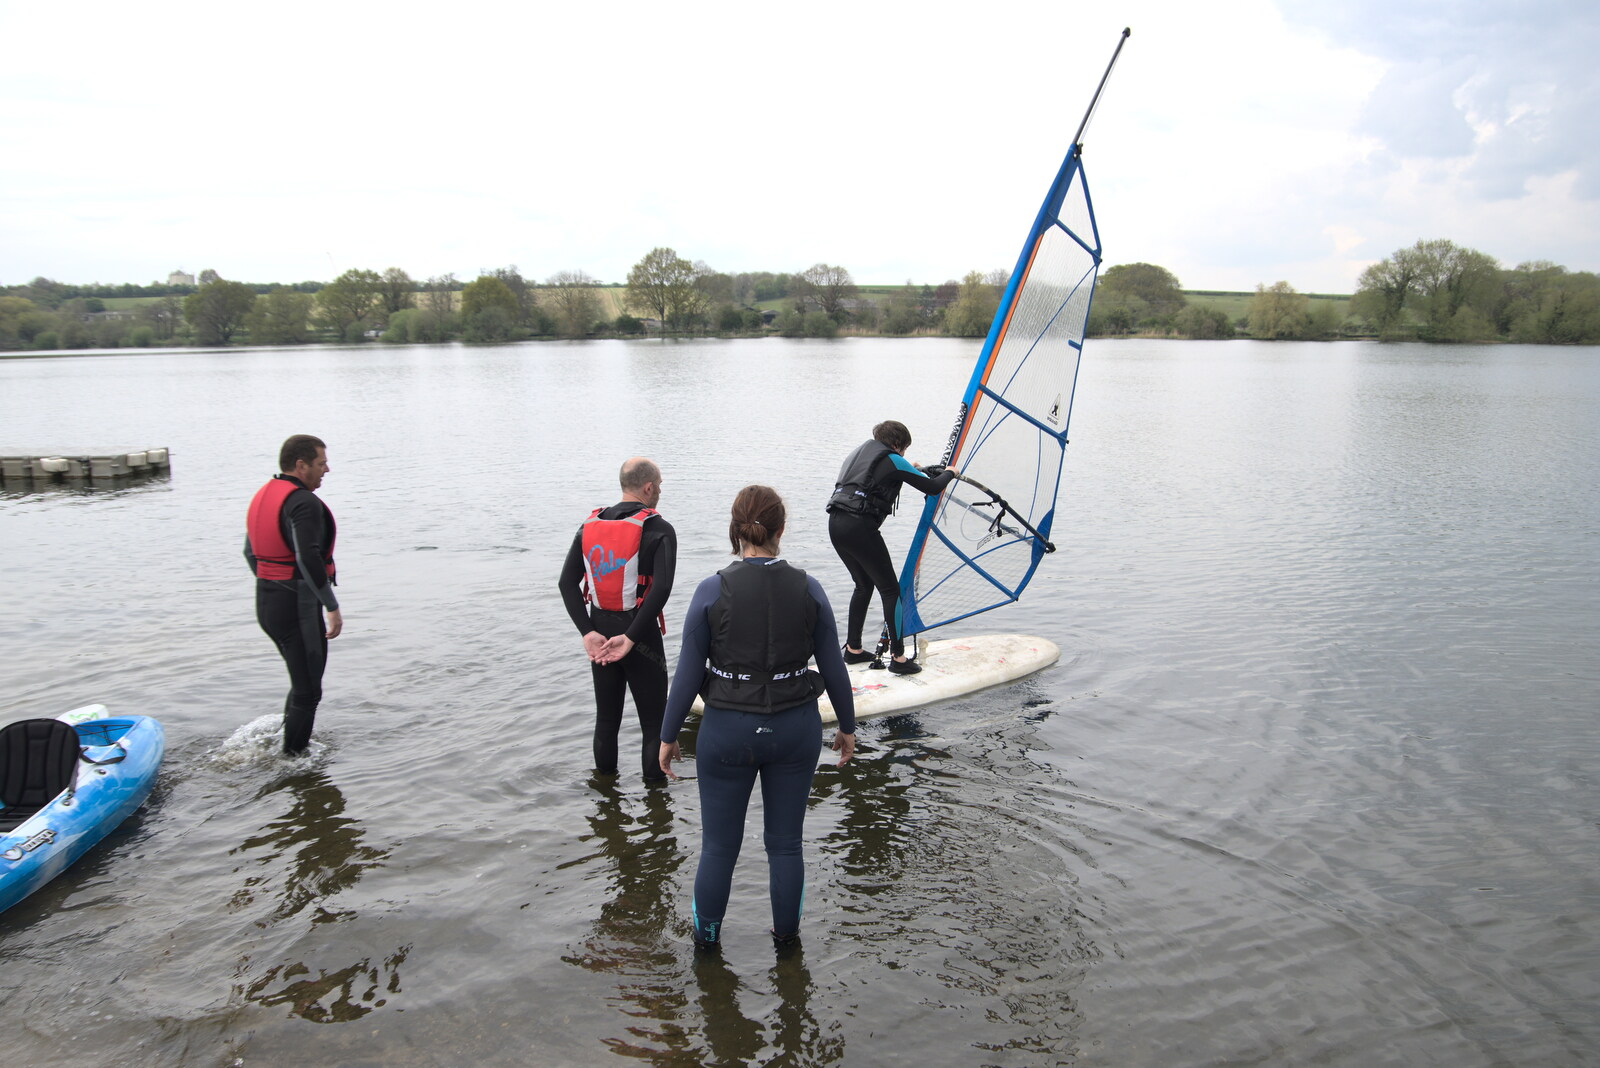 The Canoe's First Outing, Weybread Lake, Harleston - 1st May 2022: More mingling around Fred's windsurfing